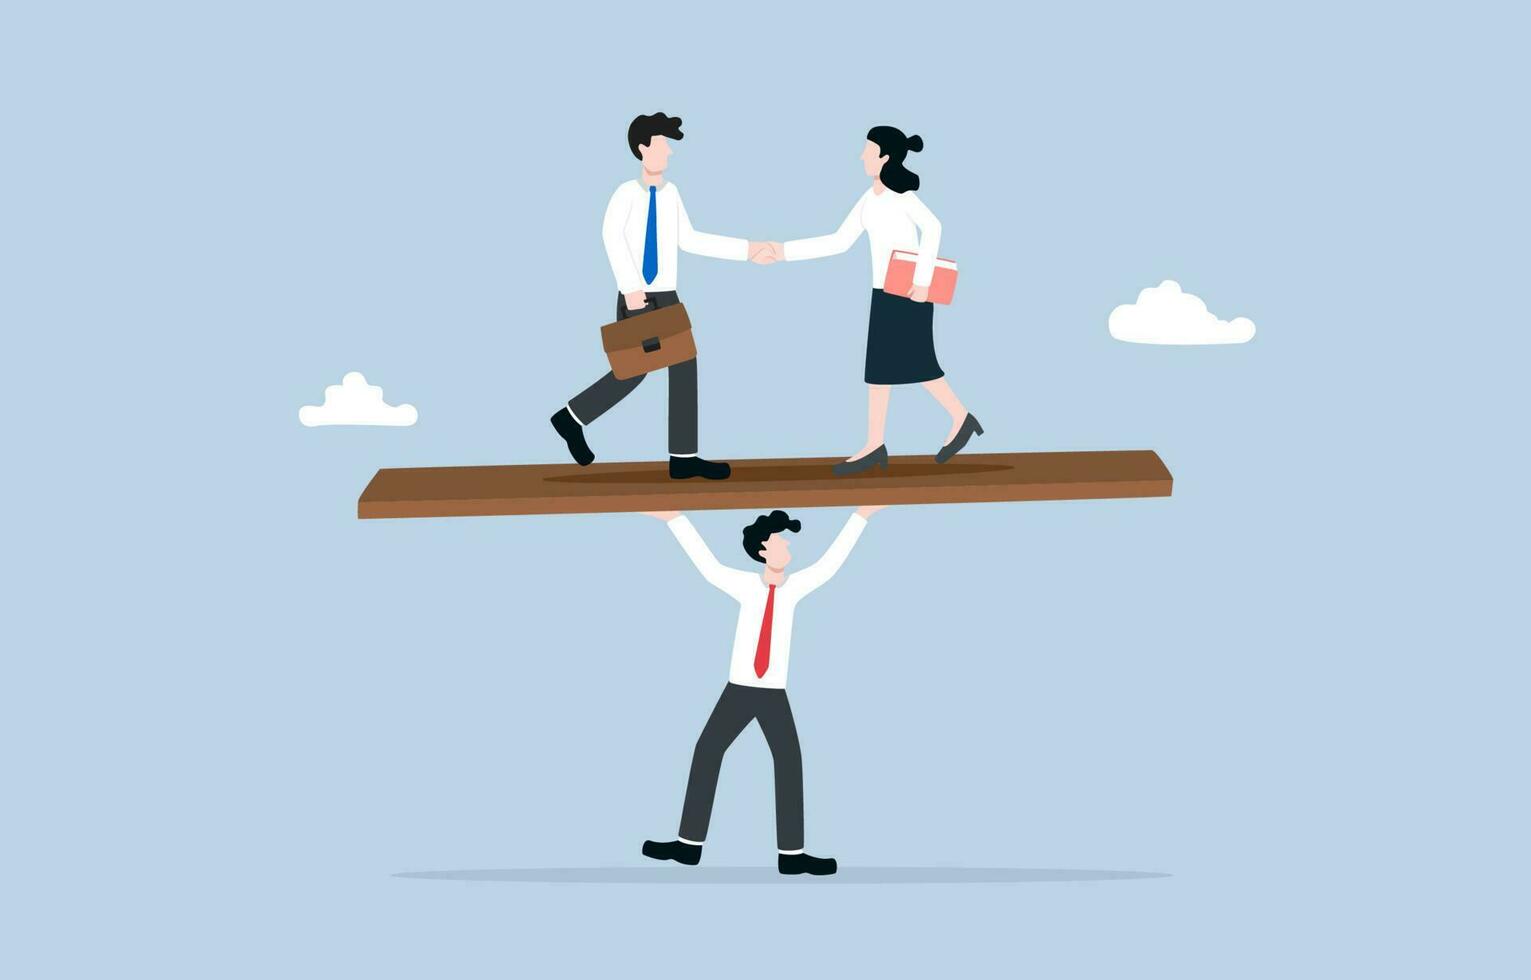 Business negotiation, mediation process, mutually beneficial resolution, communication and interpersonal skills concept, Businessman trying to balance negotiation partners on seesaw. vector